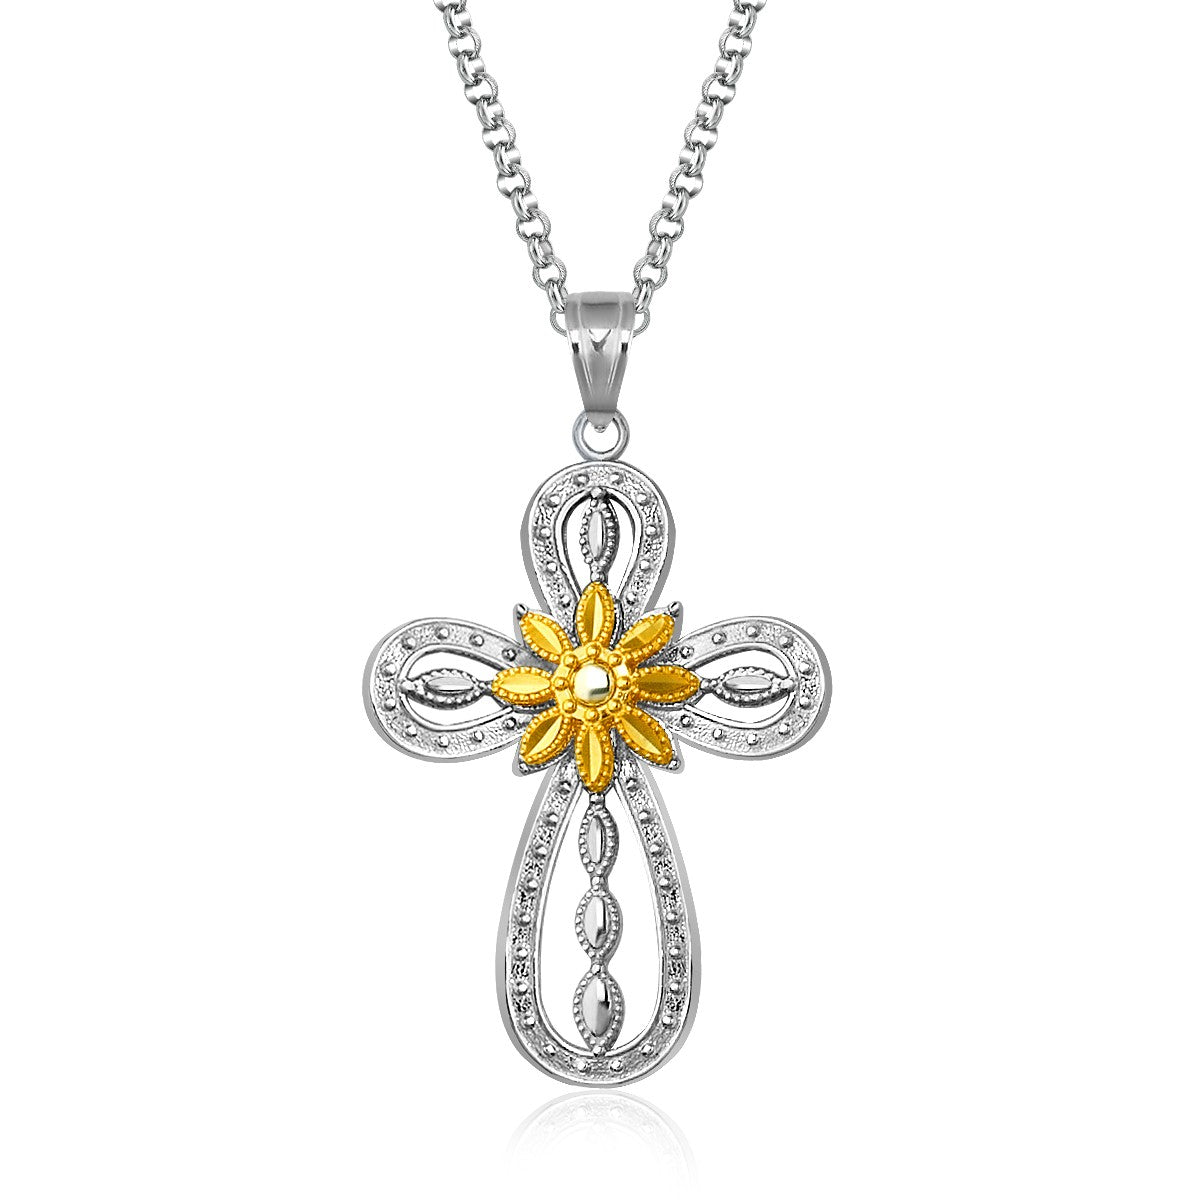 Designer Sterling Silver and 14K Yellow Gold Open Loop Cross Pendant